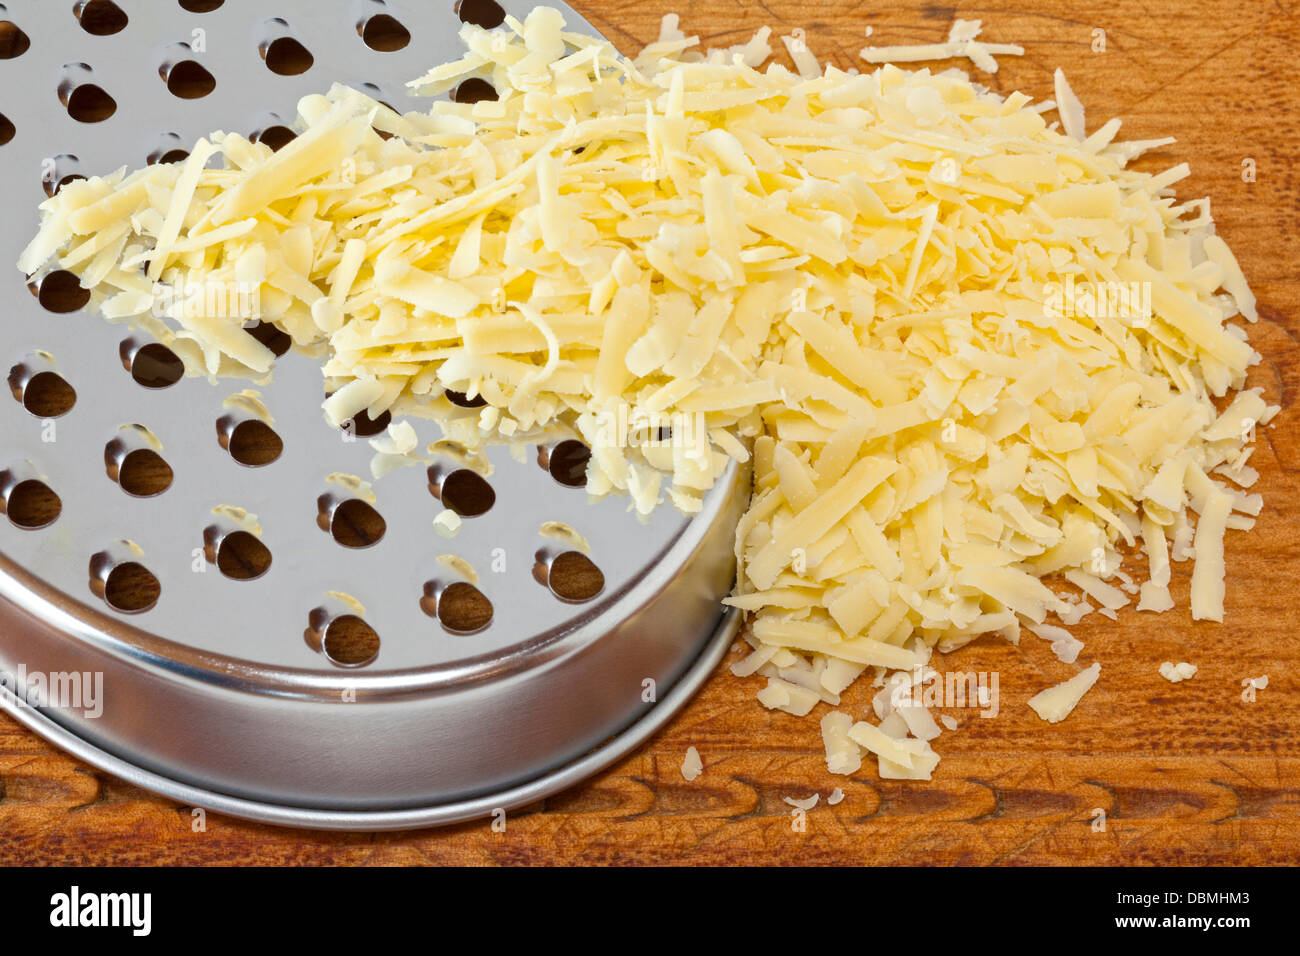 Grated Cheese - a pile of grated cheddar cheese spilling over a cheese grater, on a wooden board. Stock Photo